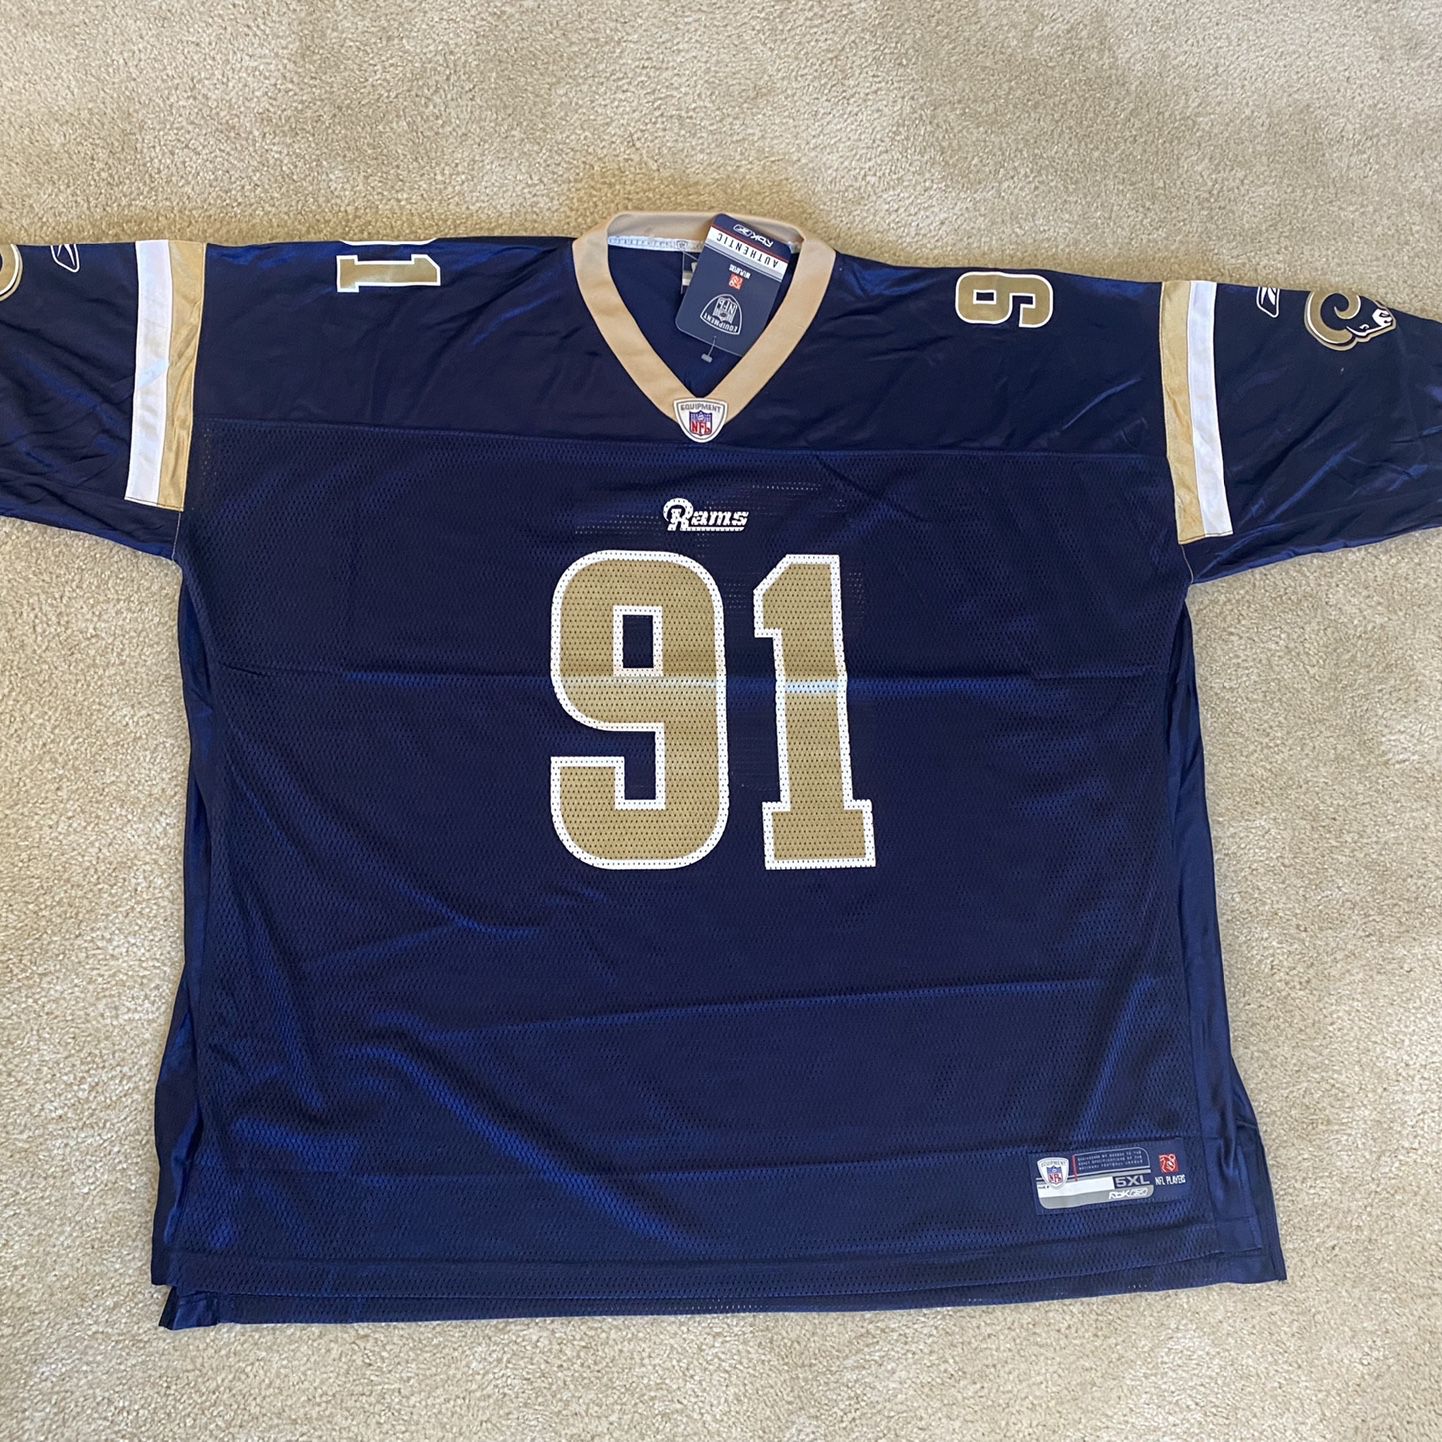 Throwback Jerseys for Sale in La Mesa, CA - OfferUp